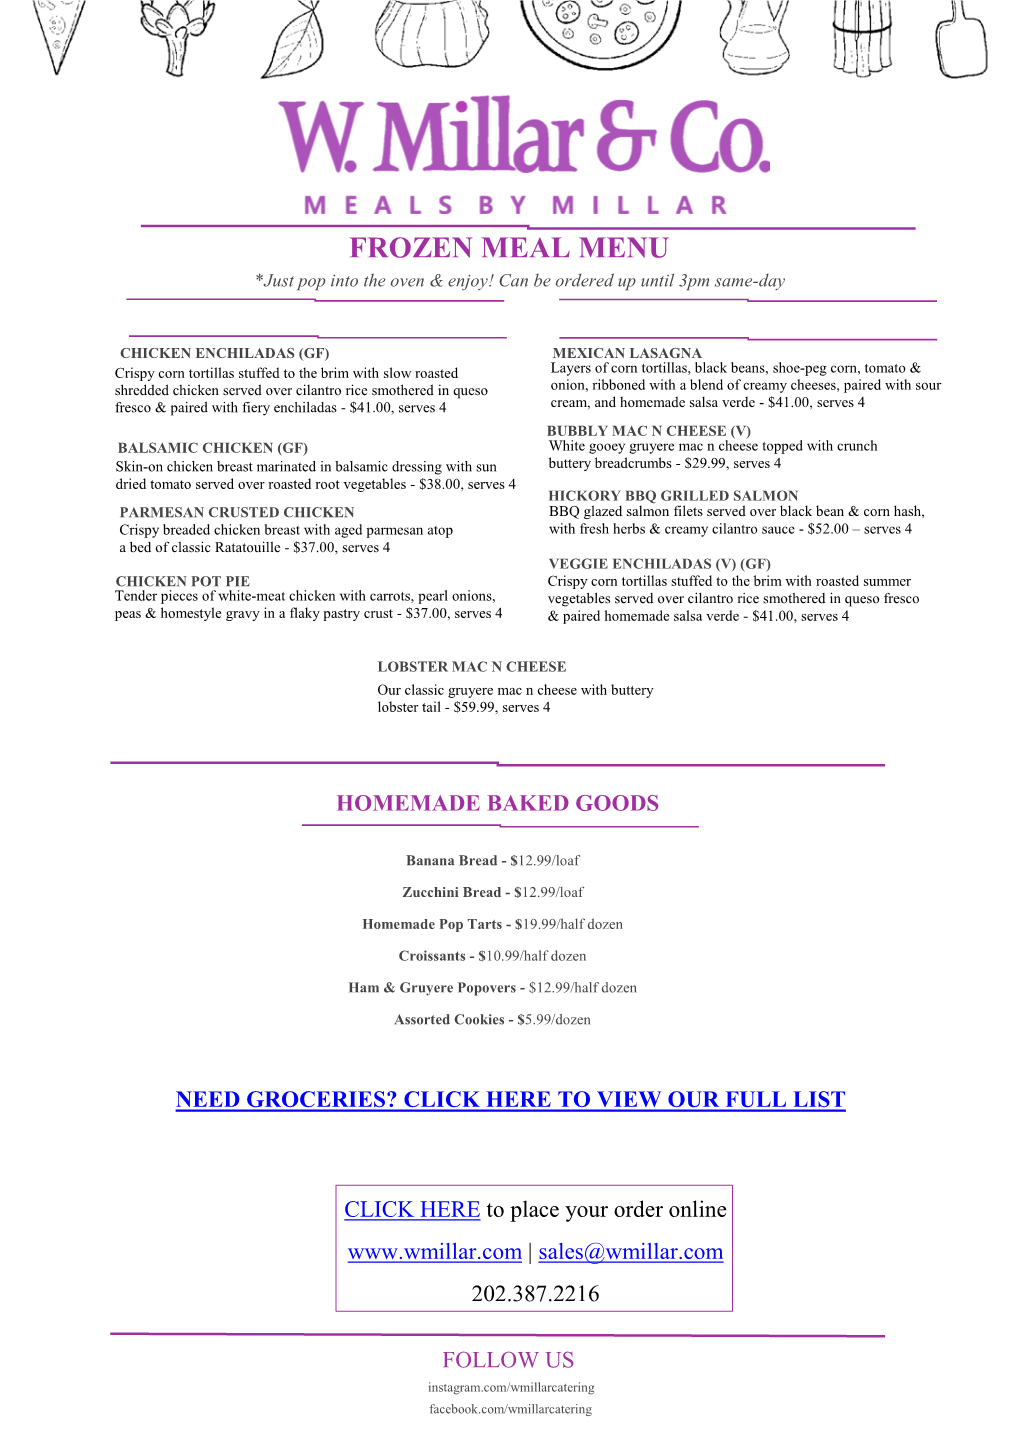 FROZEN MEAL MENU *Just Pop Into the Oven & Enjoy! Can Be Ordered up Until 3Pm Same-Day